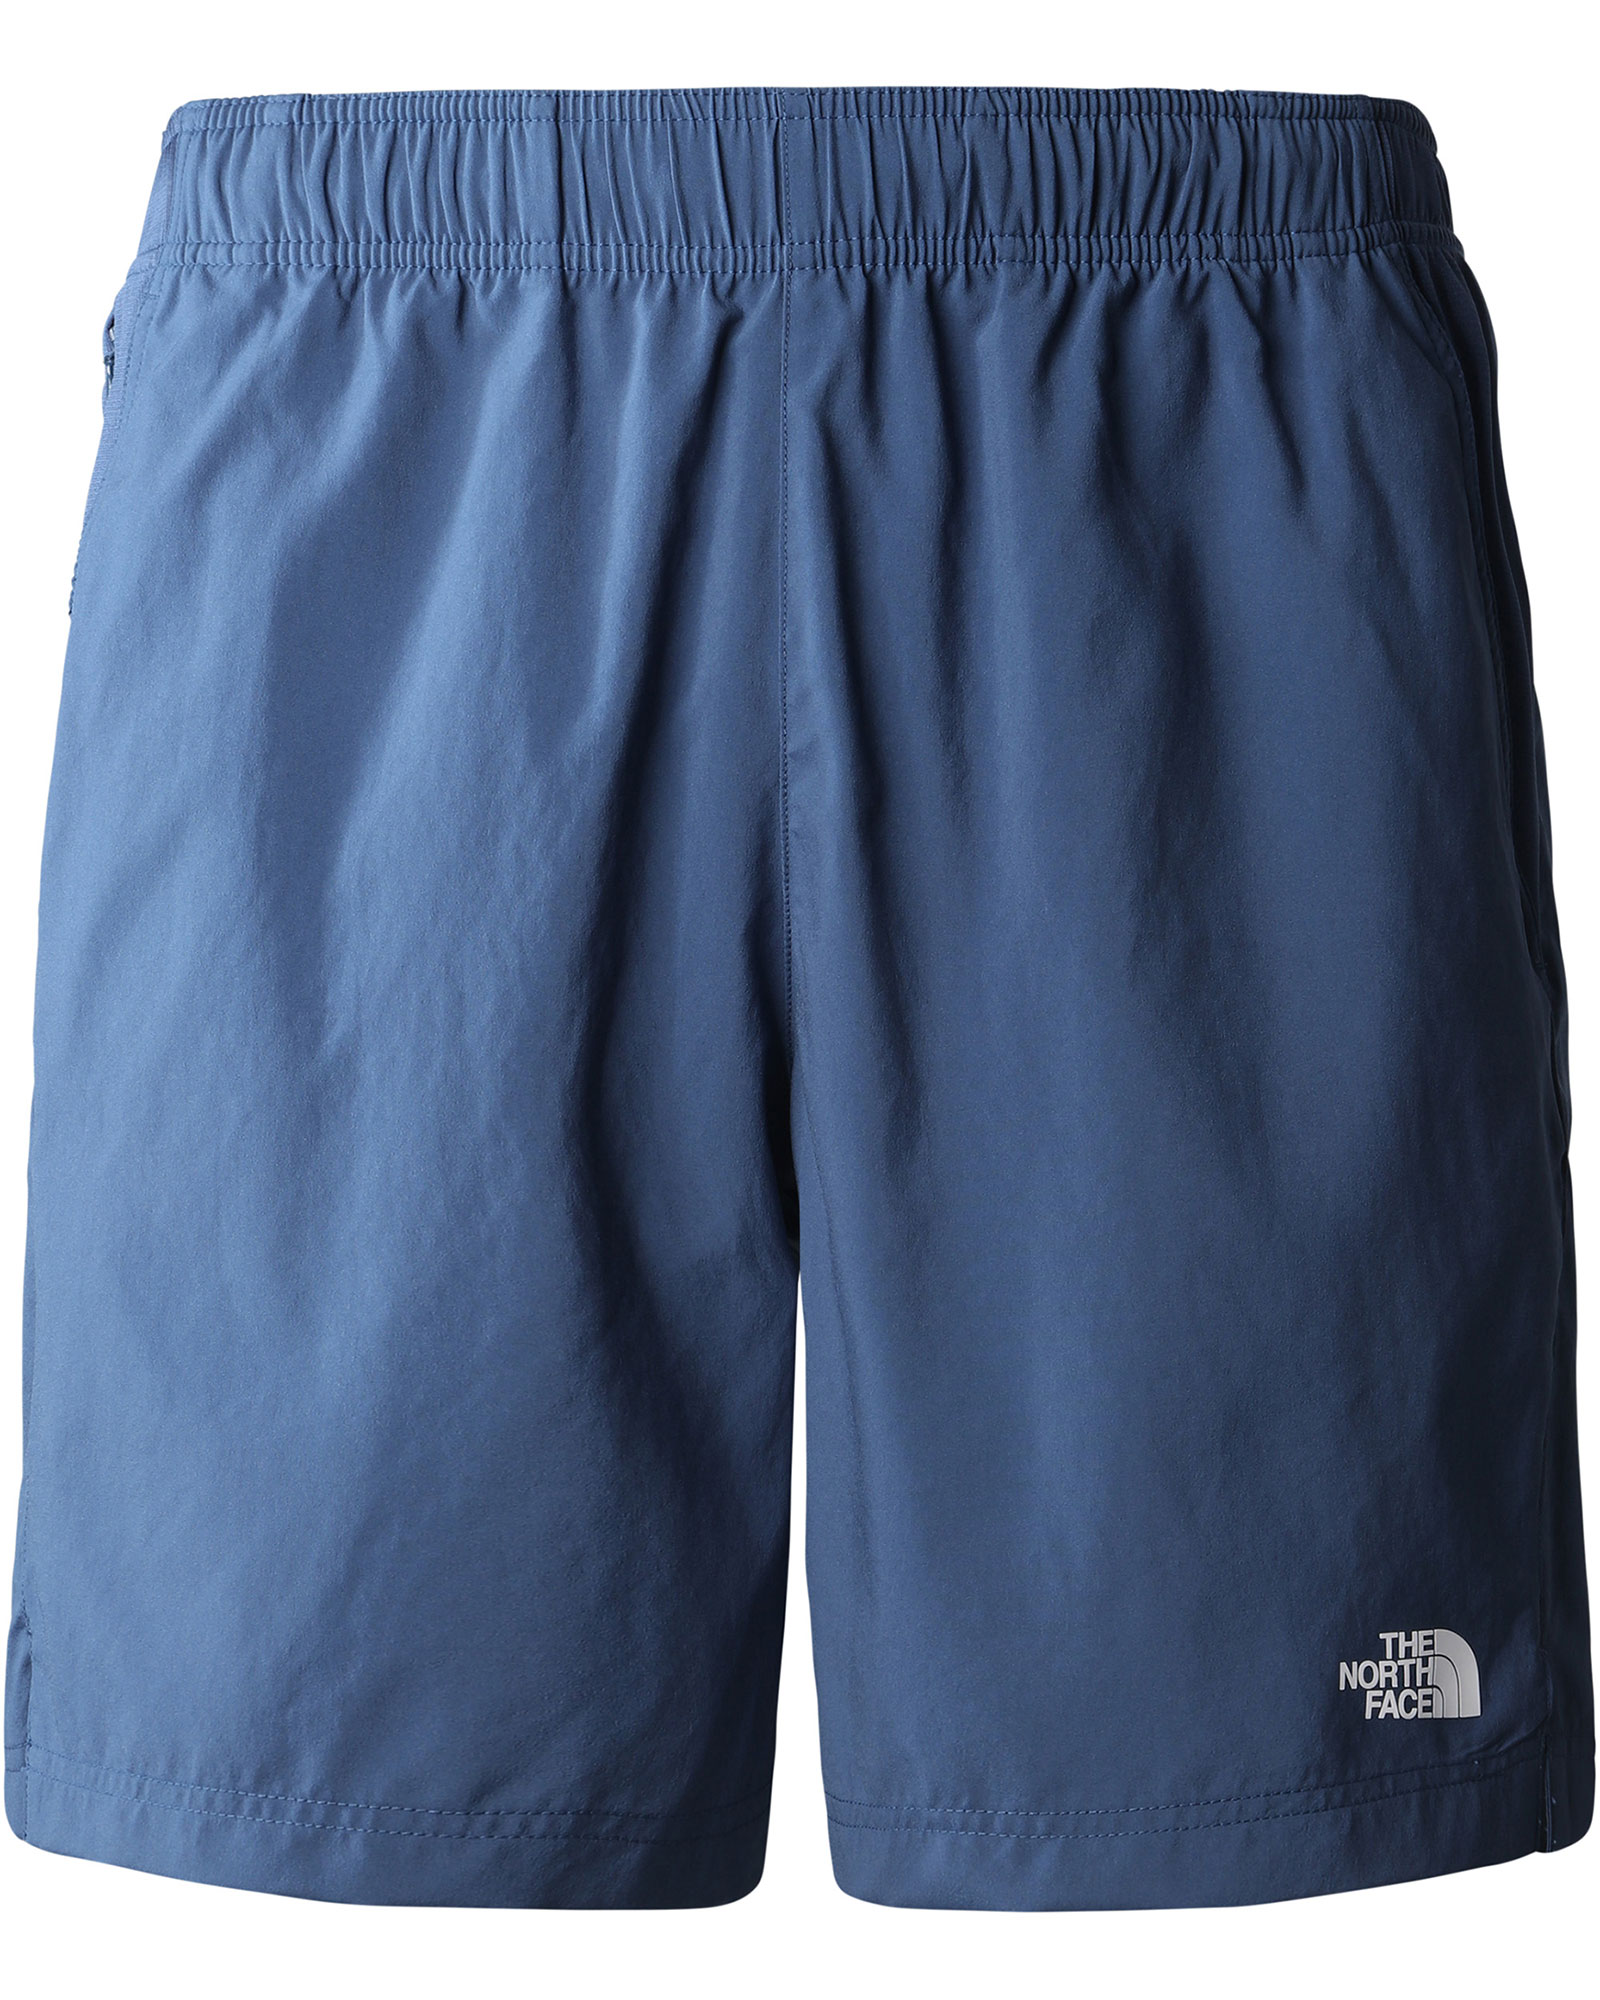 The North Face 24/7 Men’s Shorts - Shady Blue S